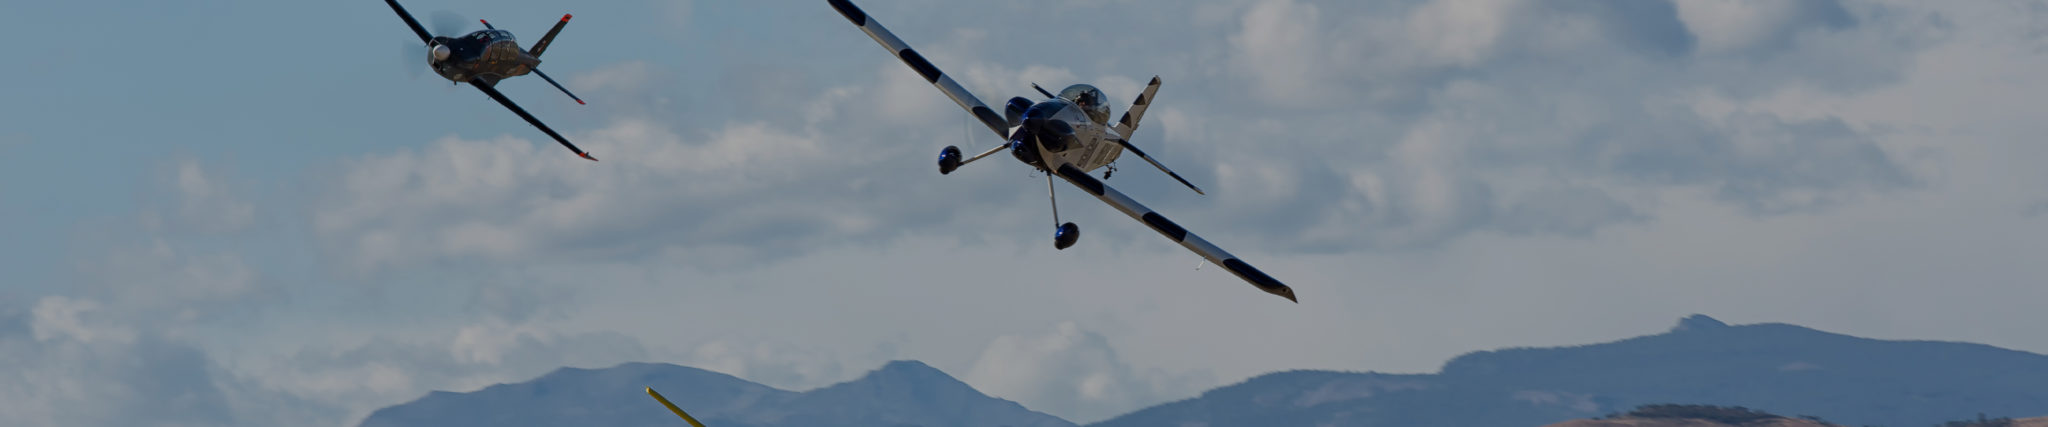 Event Details Reno Air Races | Reno Air Races Map of Event